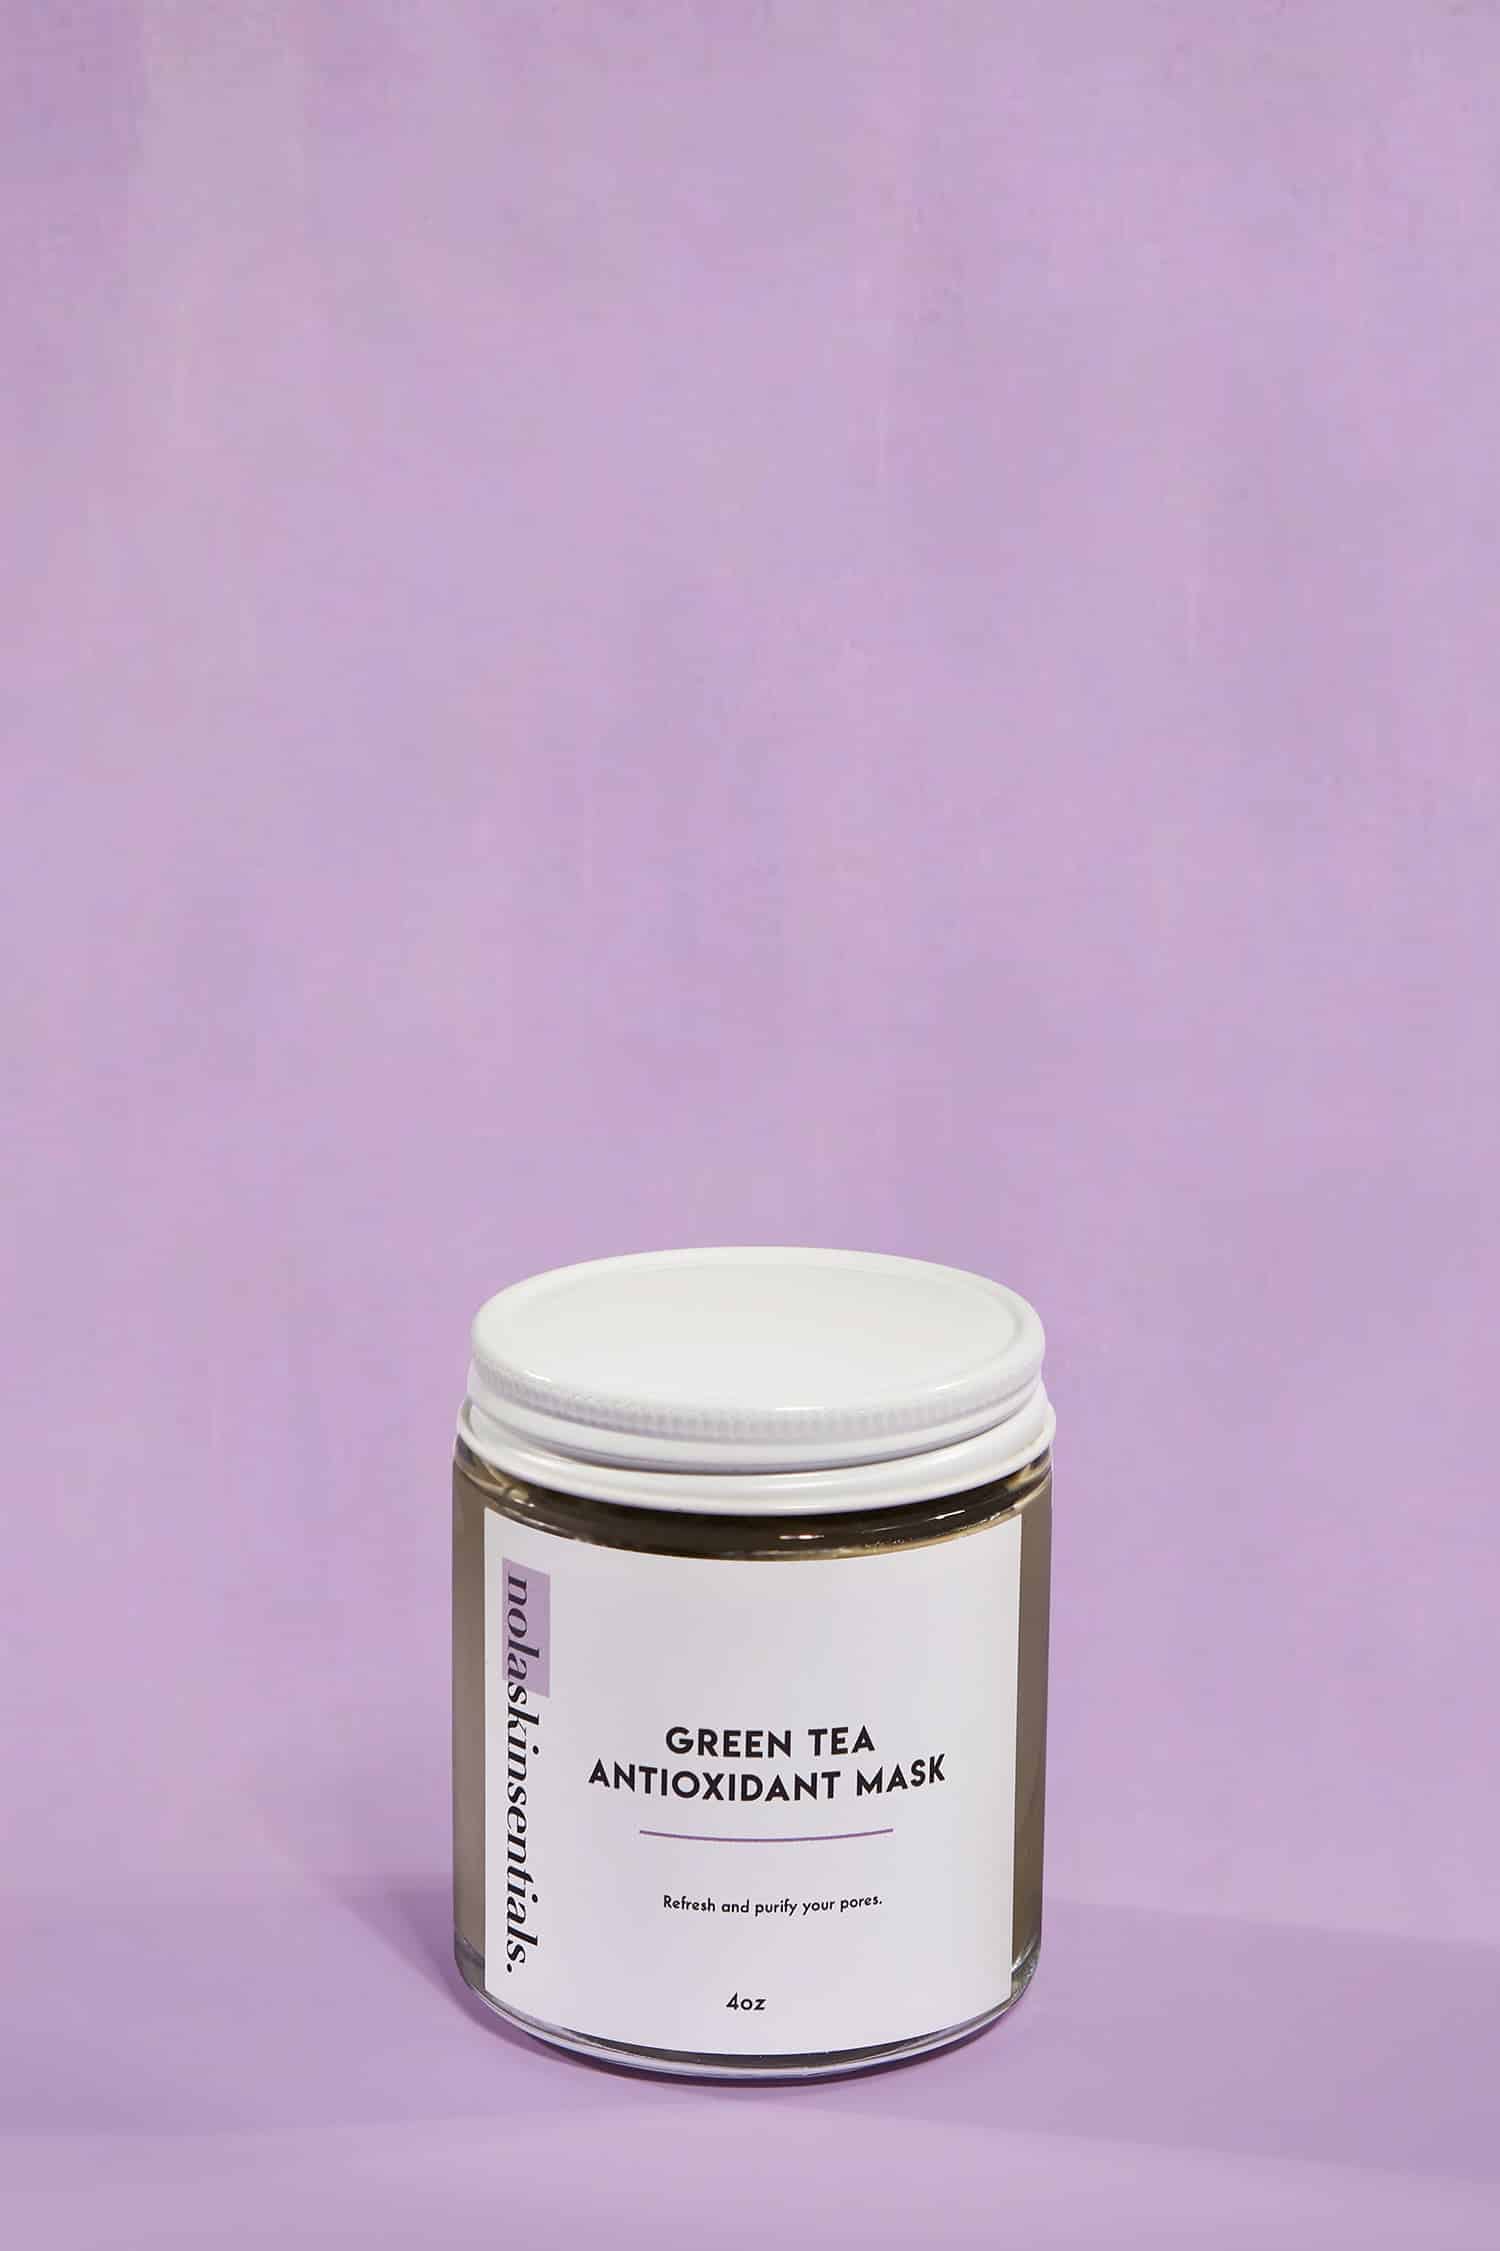 A glass jar of green tea face mask. Used for refreshing skin with antioxidants.